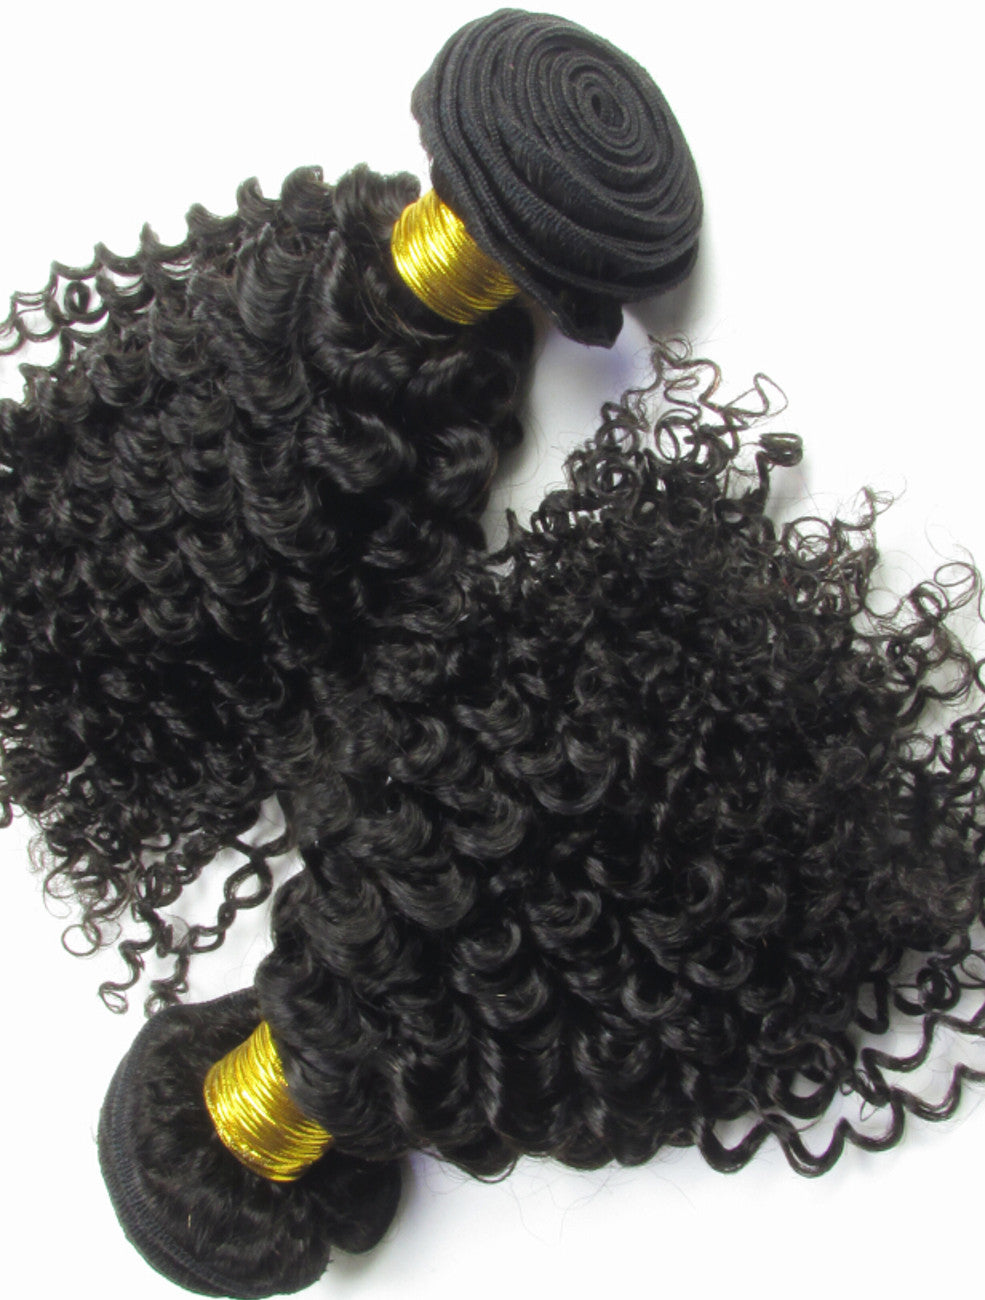 Afro Kinky Curly Weave Short Hairstyles, Malaysian Hair 100